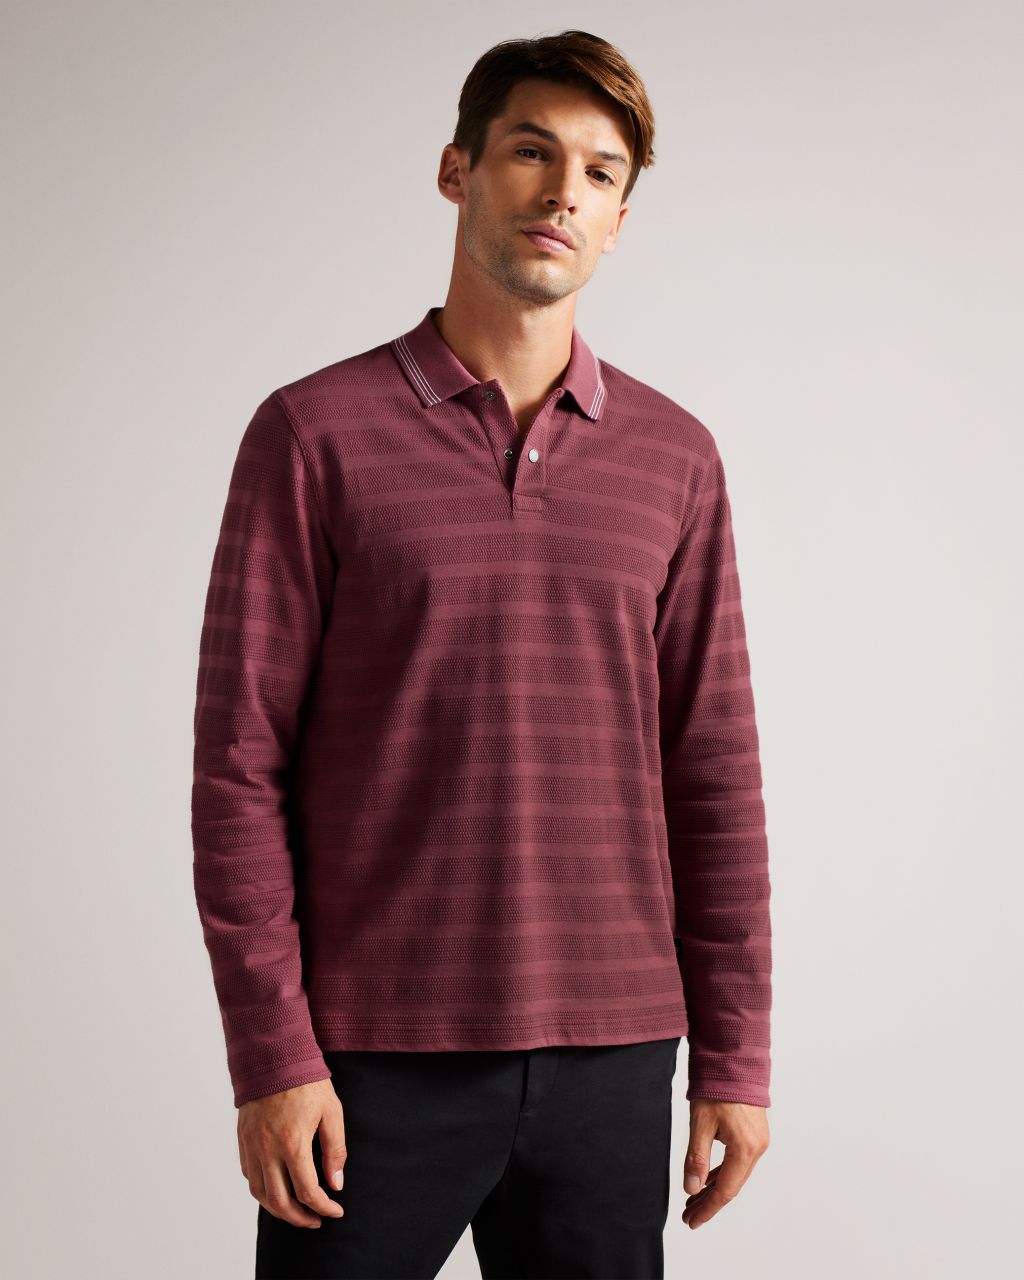 Ted Baker Men's Long Sleeve Textured Stripe Polo Shirt in Maroon, Penine, Cotton